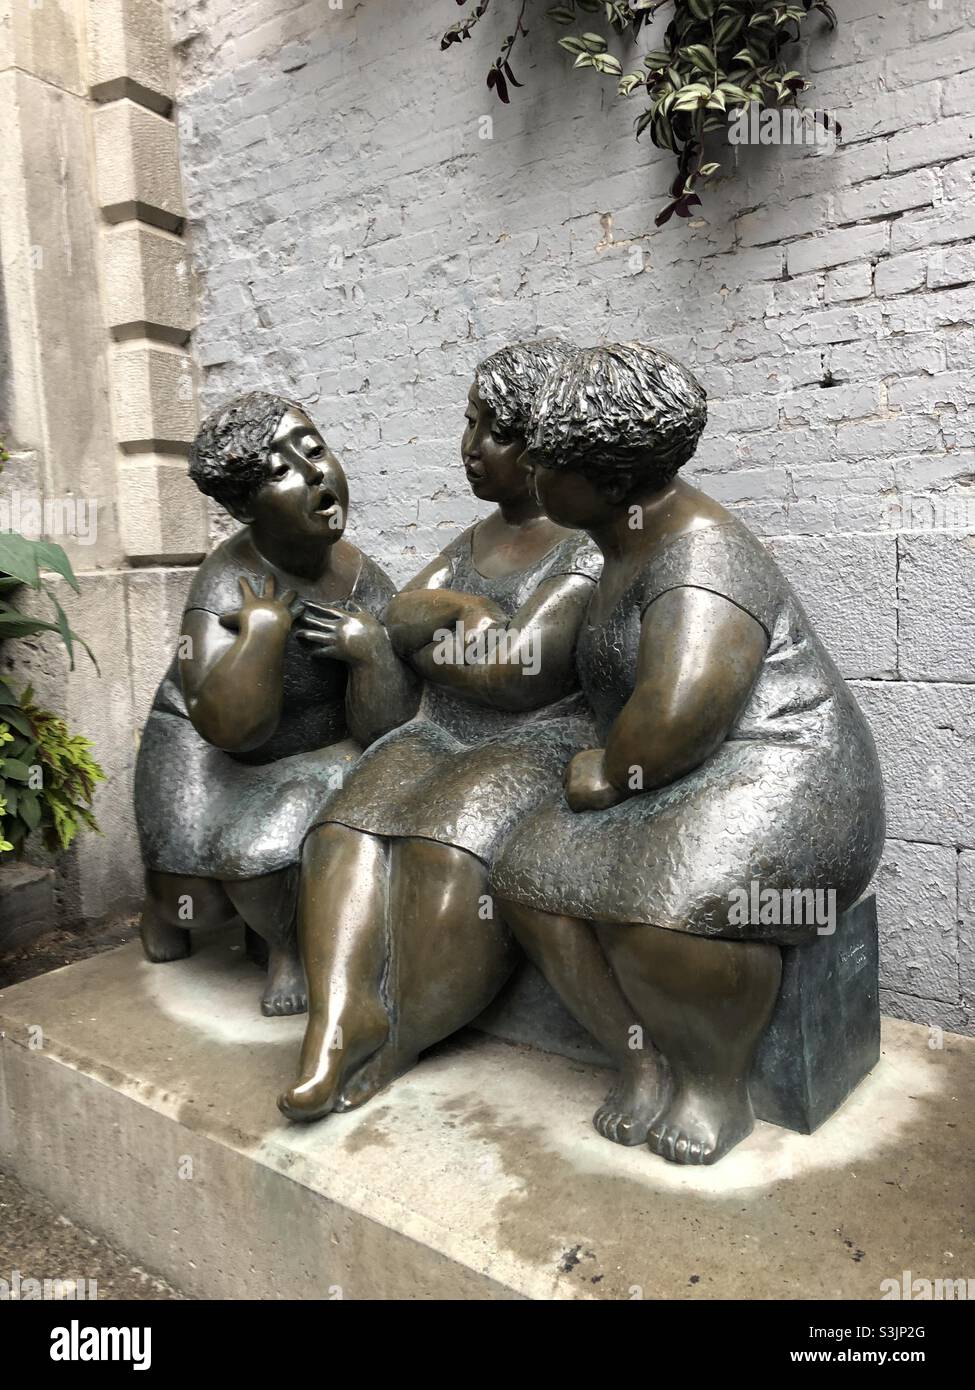 A bronze sculpture of three women in Old Town, Montreal, Quebec